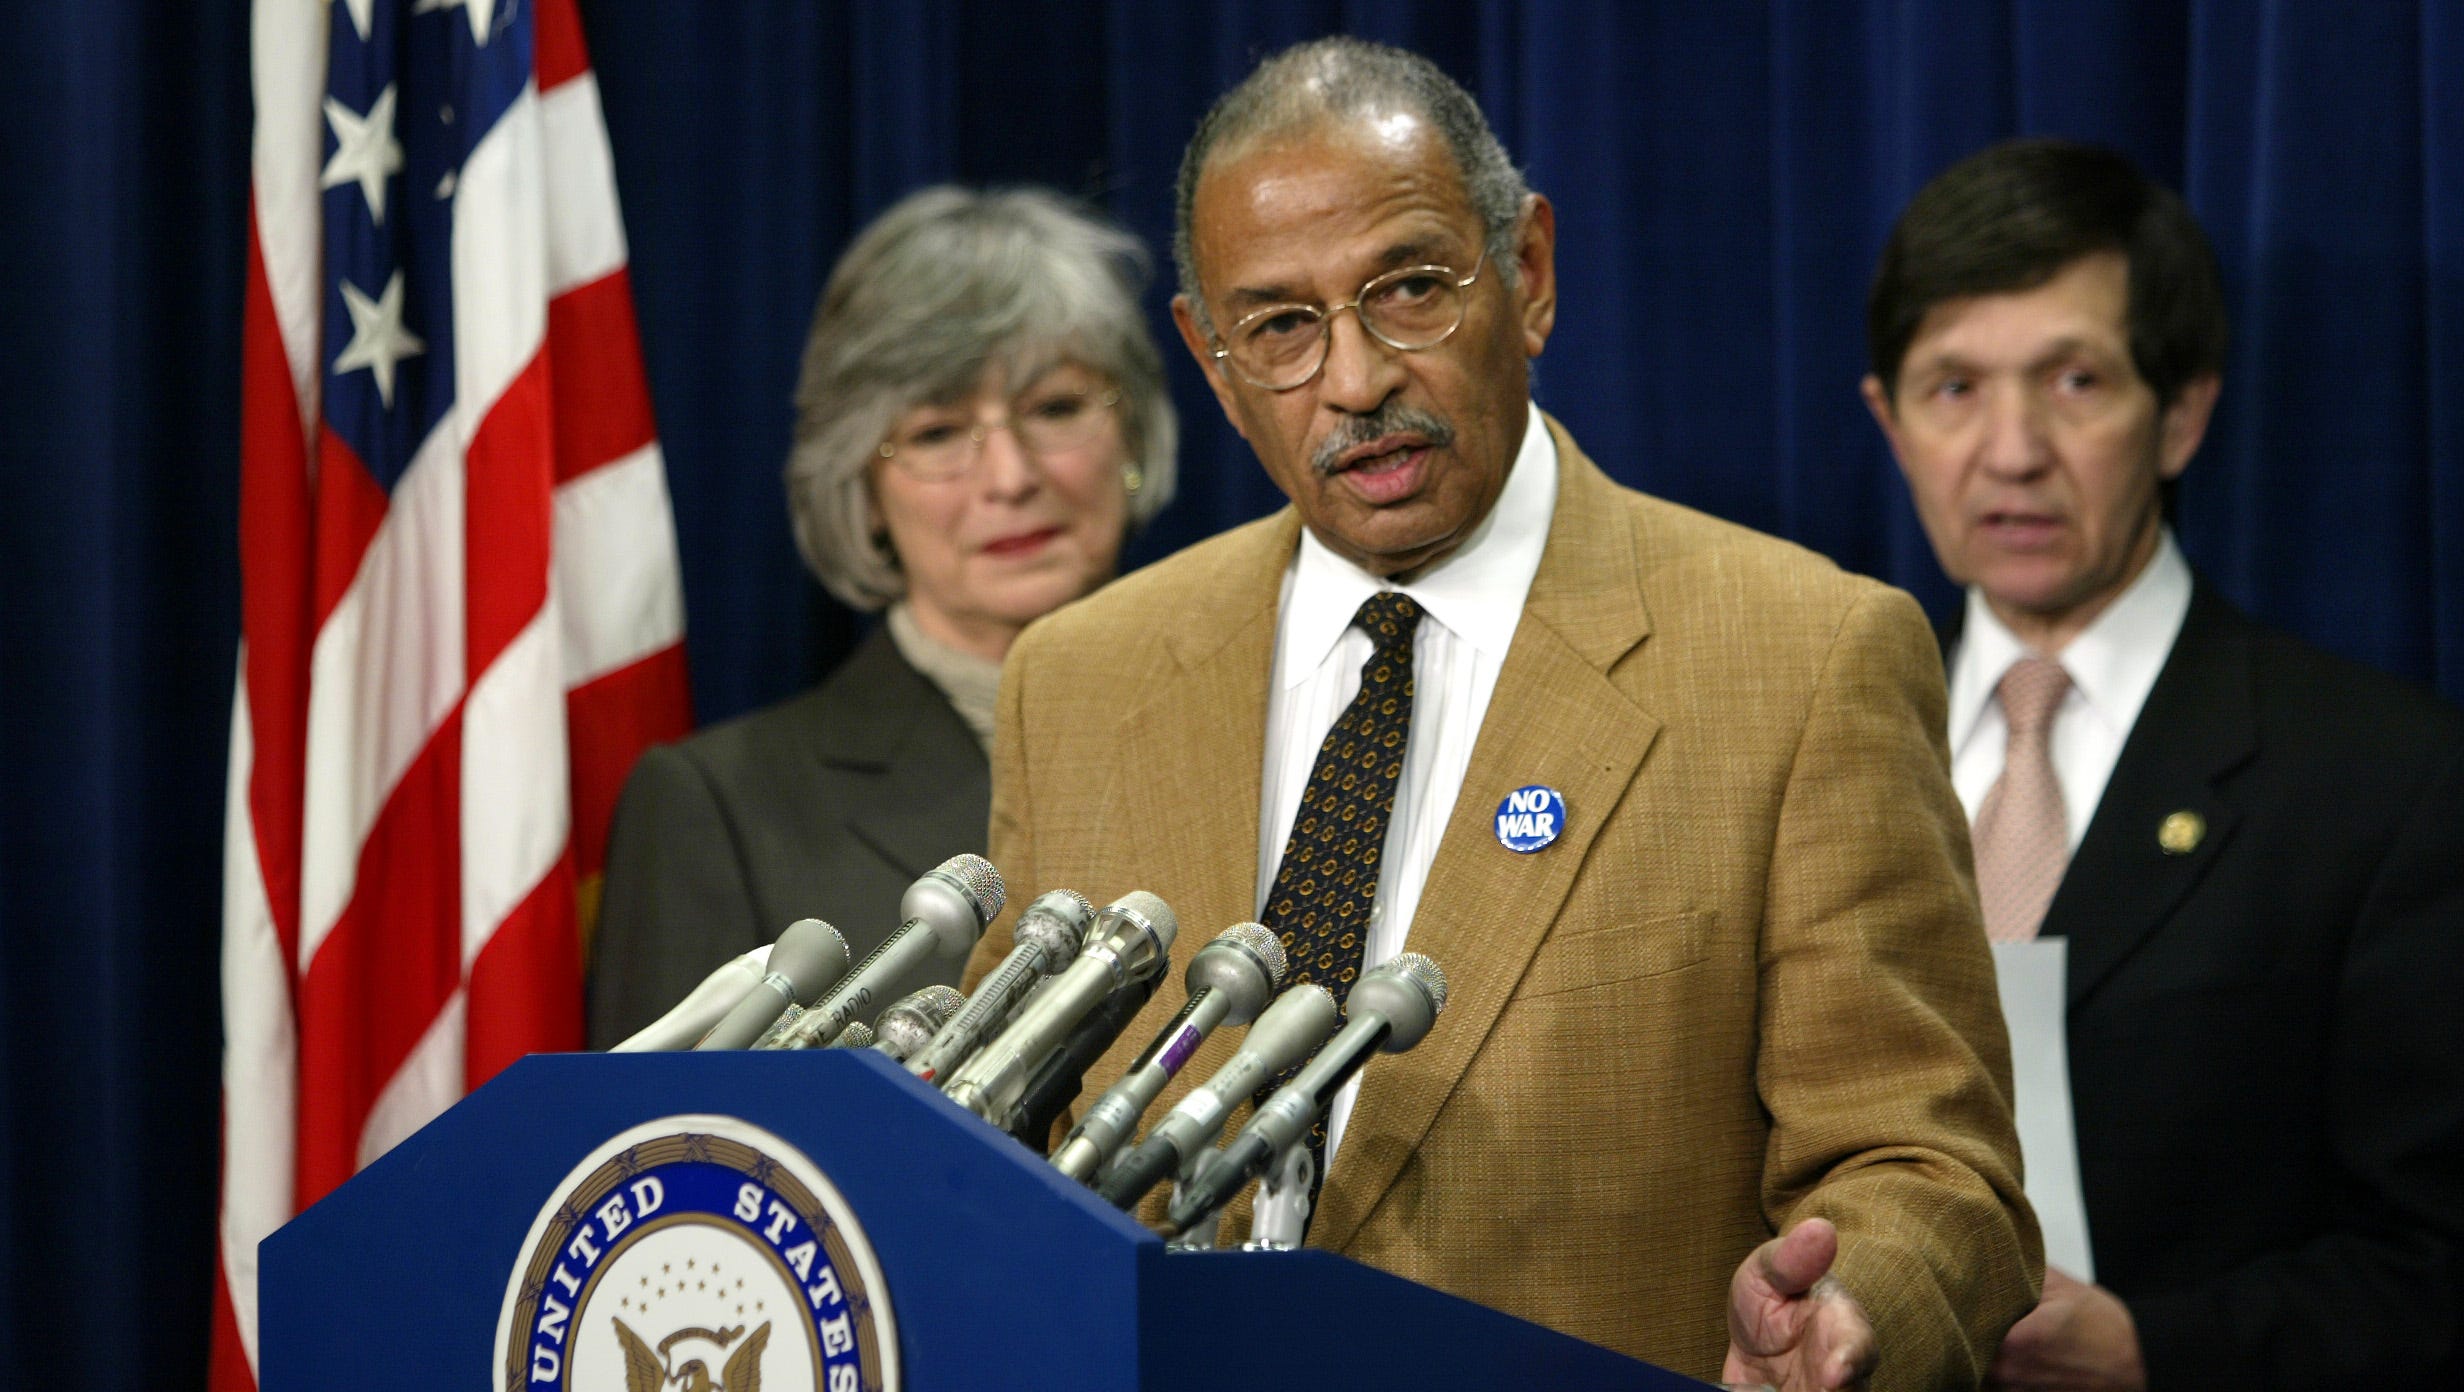 Conyers voices his concern about President George W. Bush's posture toward Iraq, as he speaks to reporters on Capitol Hill, Dec. 9, 2002. He is joined by Rep. Lynn C. Woolsey, D-Calif., left, and Rep. Dennis J. Kucinich, D-Ohio, at right.  Seven Democrats expressed worries that the Bush administration was intent on going to war without giving the inspections a chance to work.